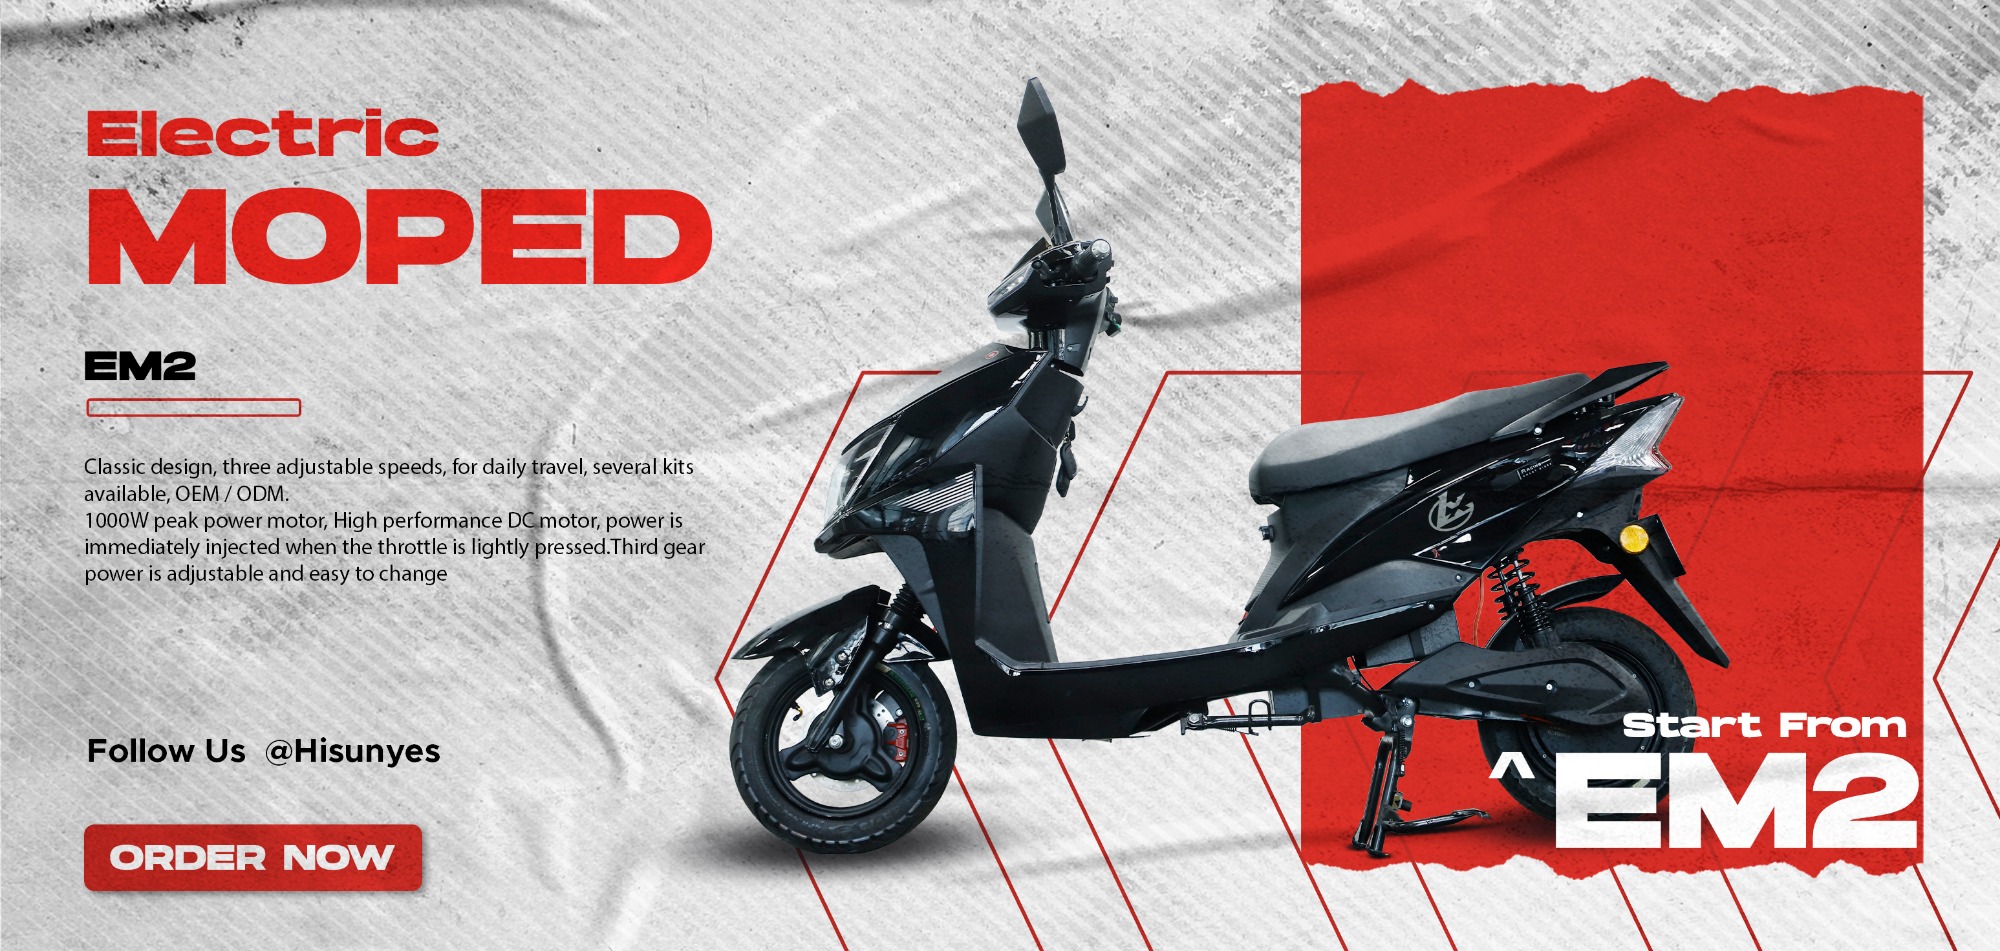 The new electric scooter EM2  is on sale